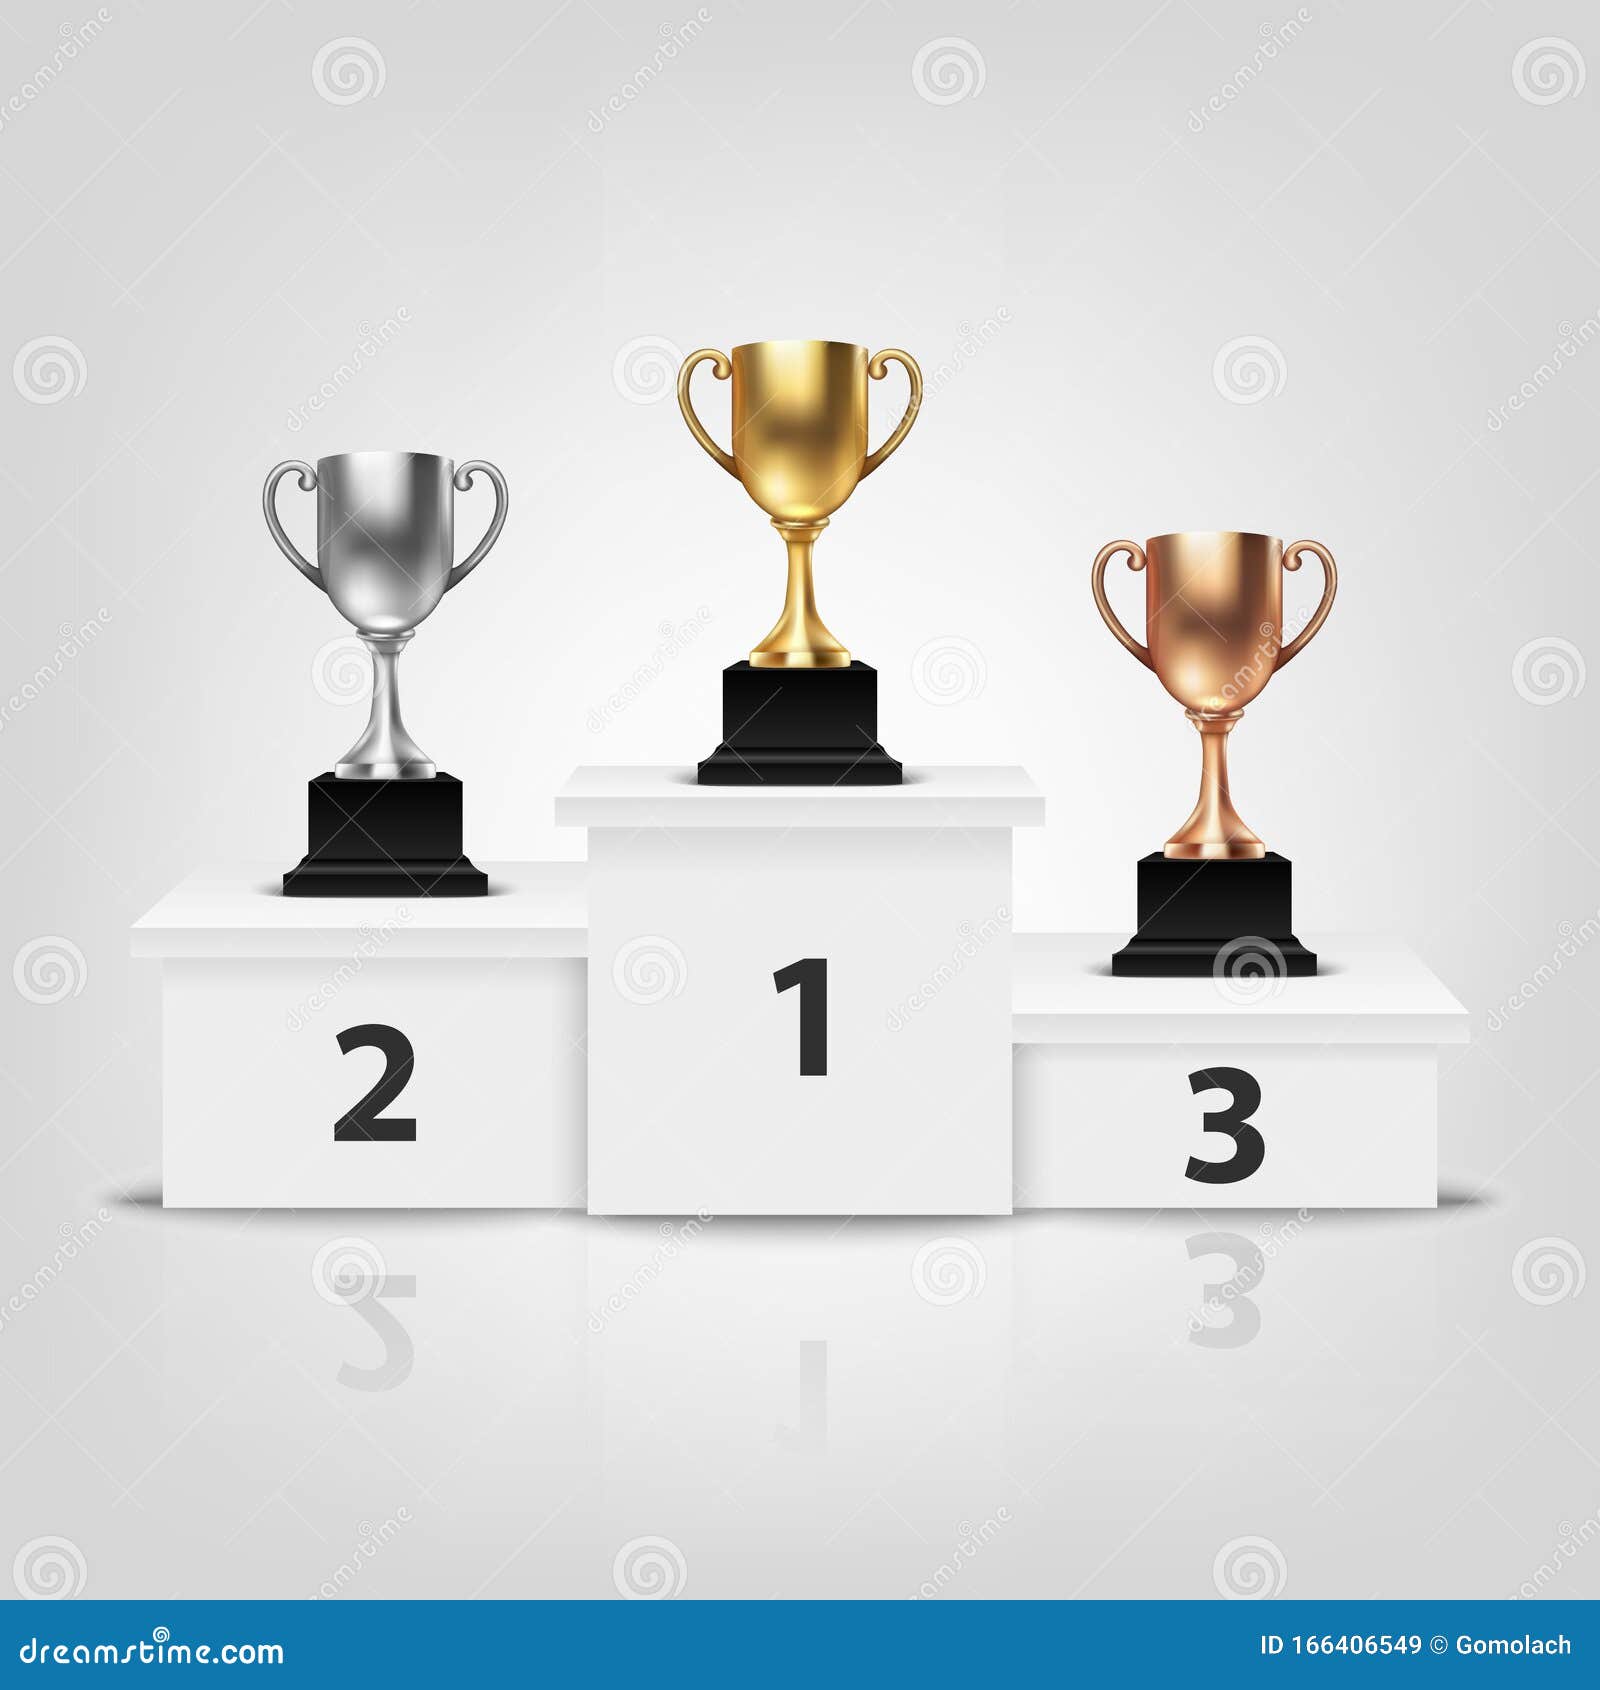 Blank Golden, Silver and Bronze Champion Cup on Winner Isolated on White Background. Design Template of Stock Vector - Illustration champion: 166406549